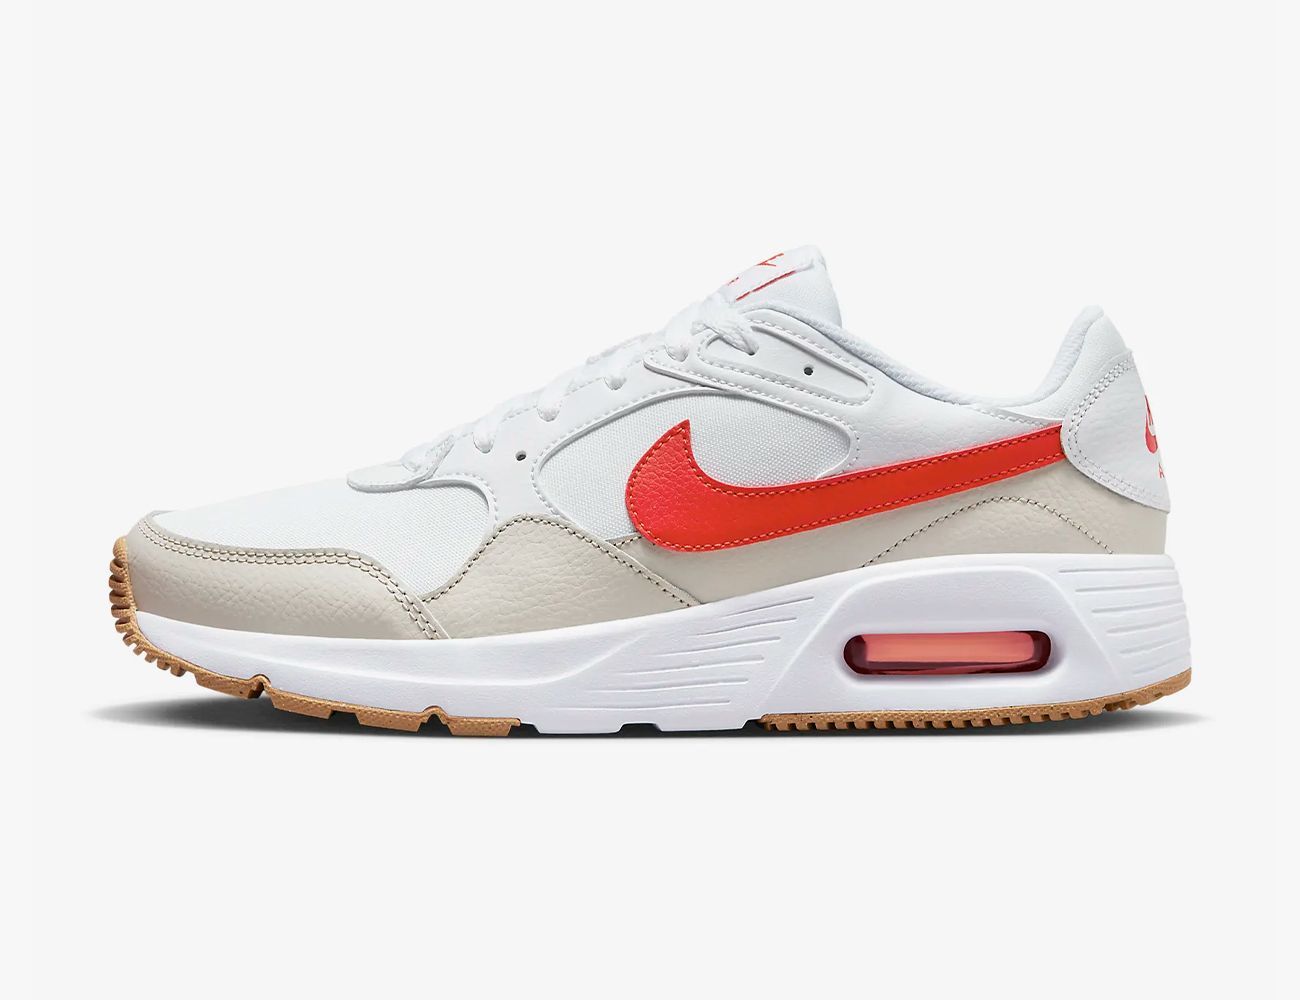 impuls Ud over at tilbagetrække 10 Nike Sneakers You Can Buy Now That Capture the 1980s Vibes of 'Air'